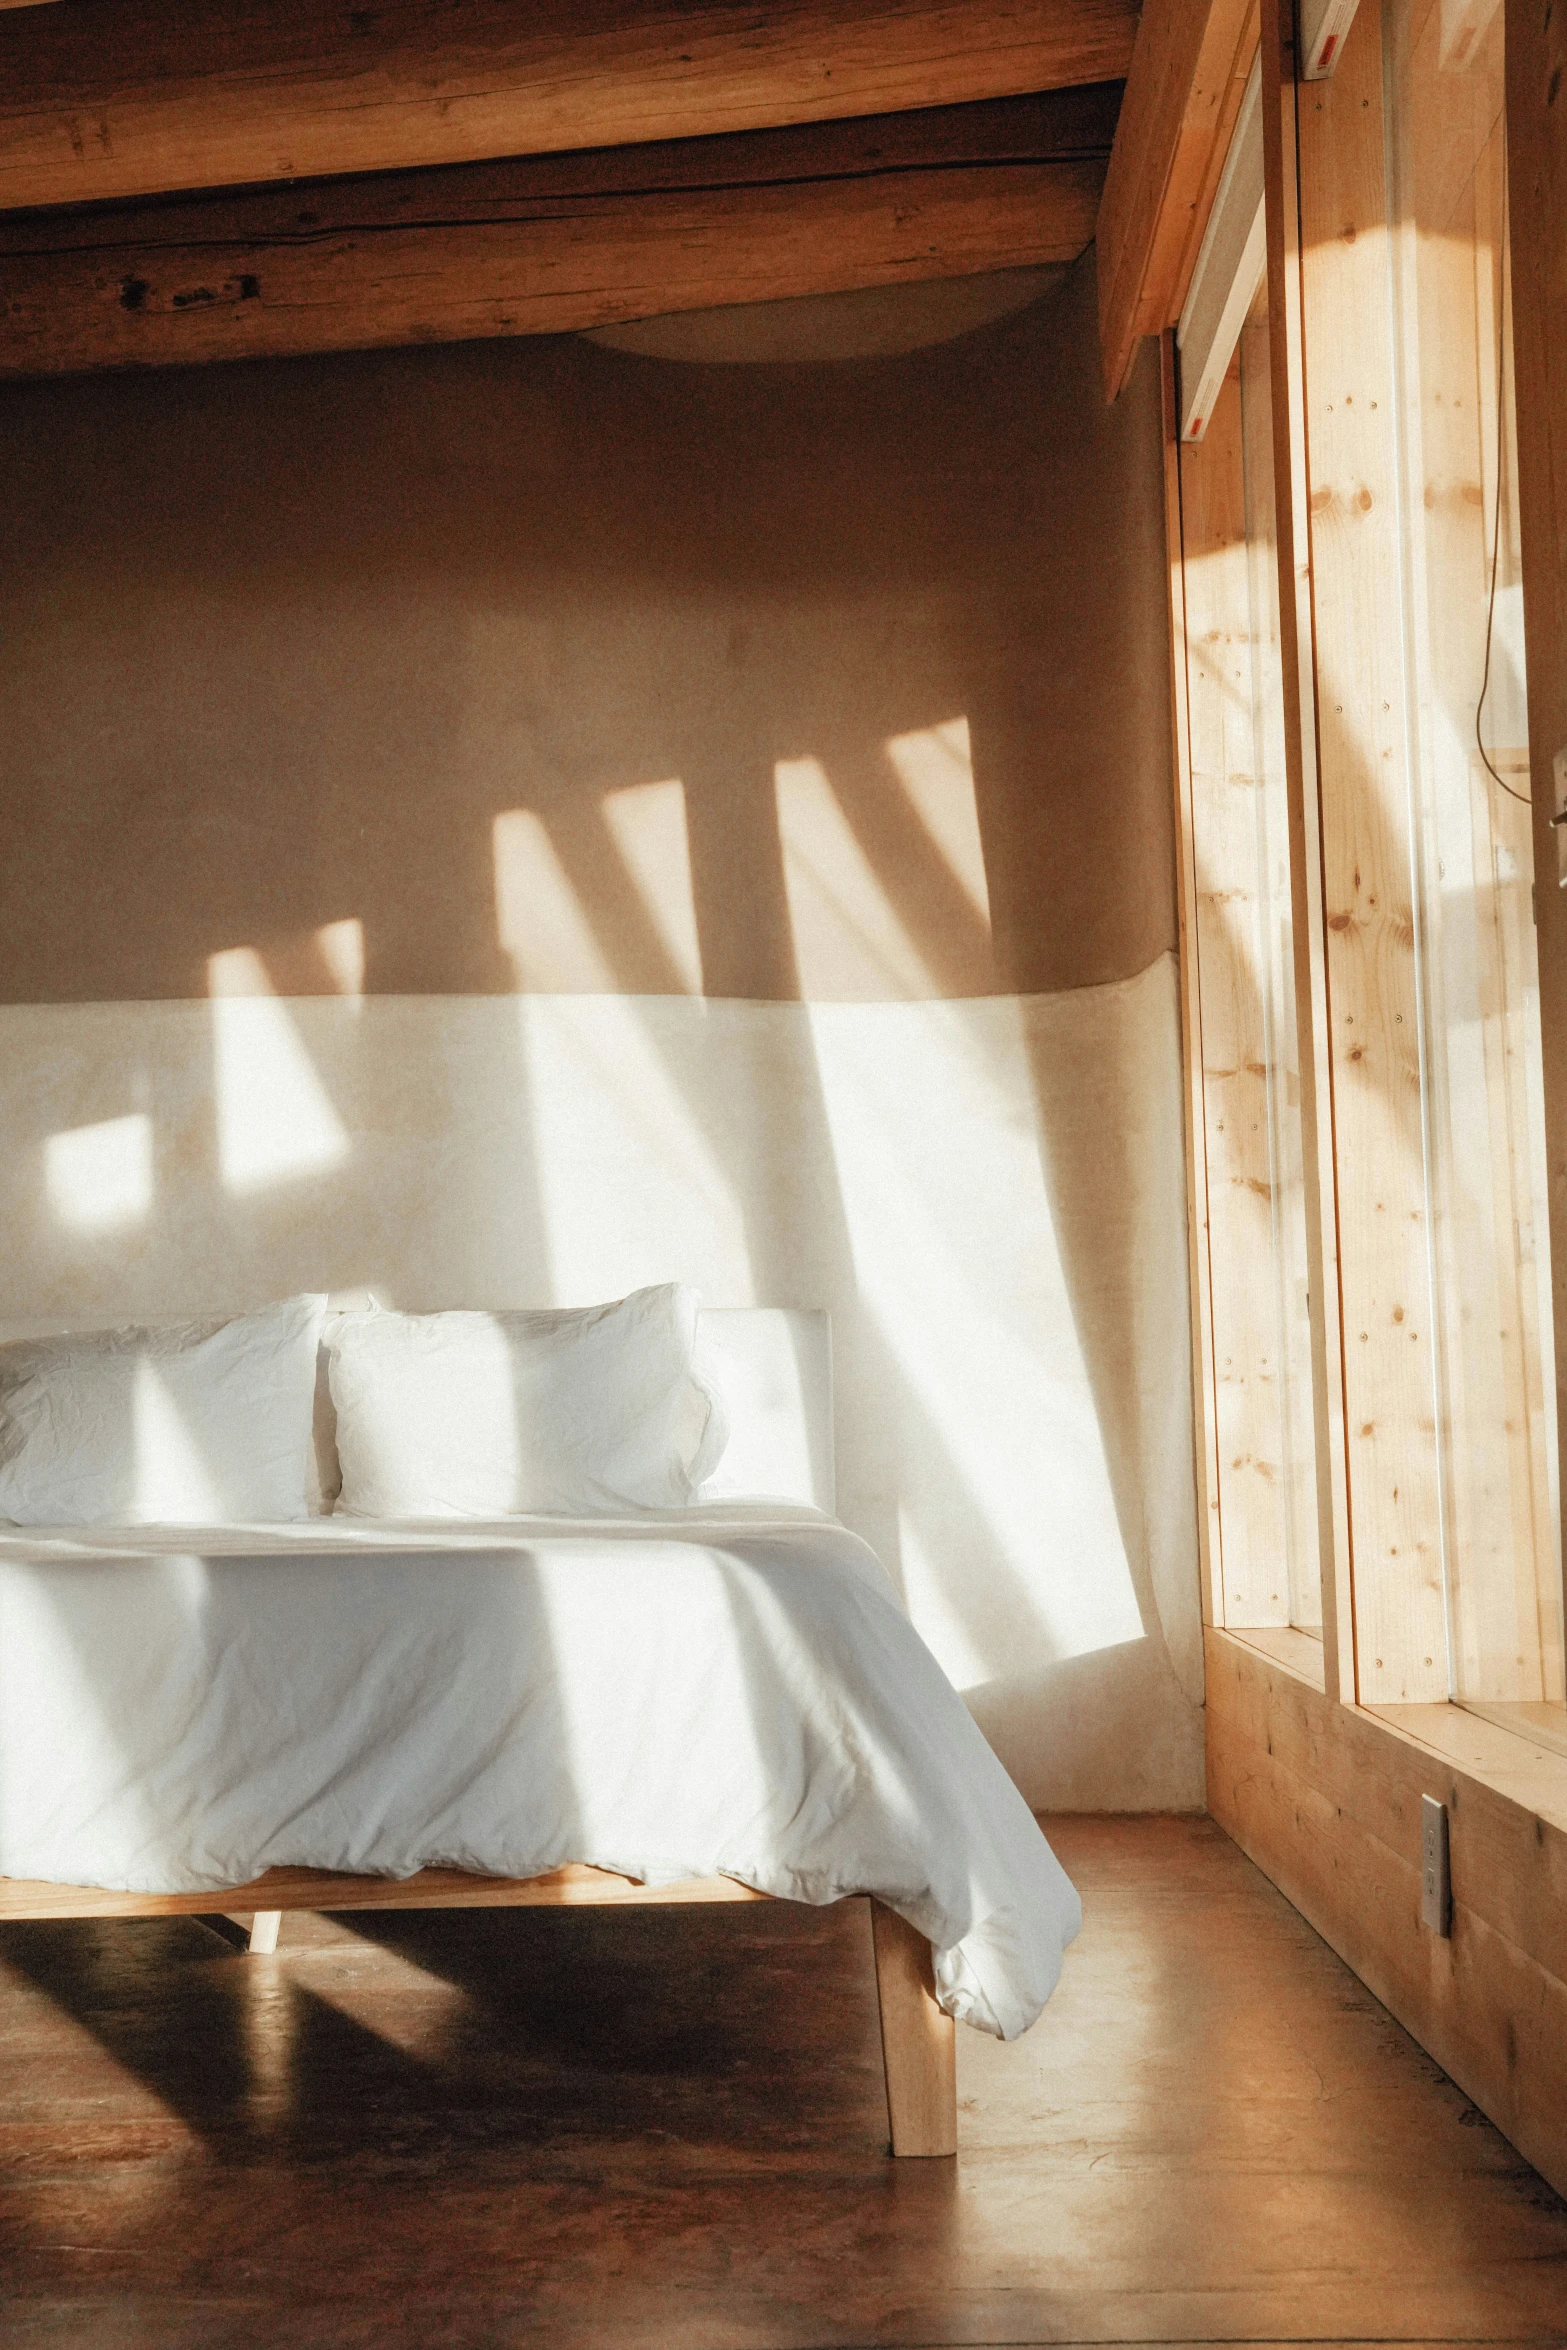 a bed is shown against a wall with several light shining on it